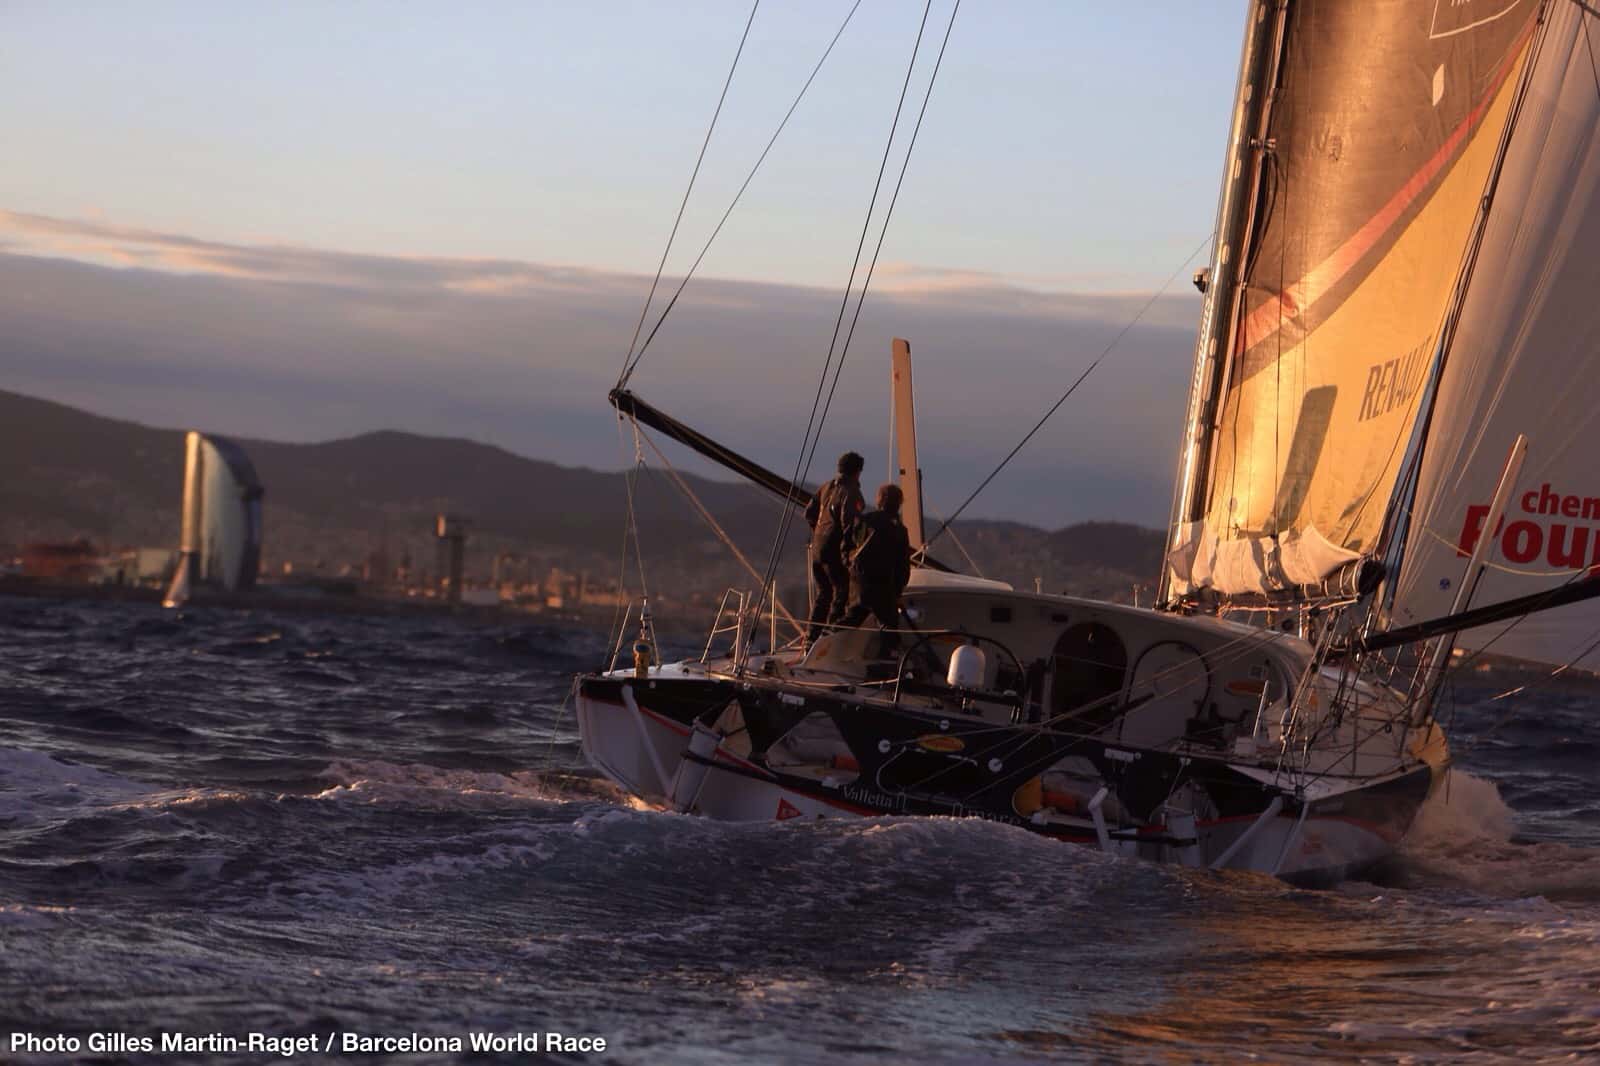 bernard-stamm-and-jean-le-cam-are-winners-of-the-barcelona-world-race-2014-2015-on-board-cheminees-poujoulat